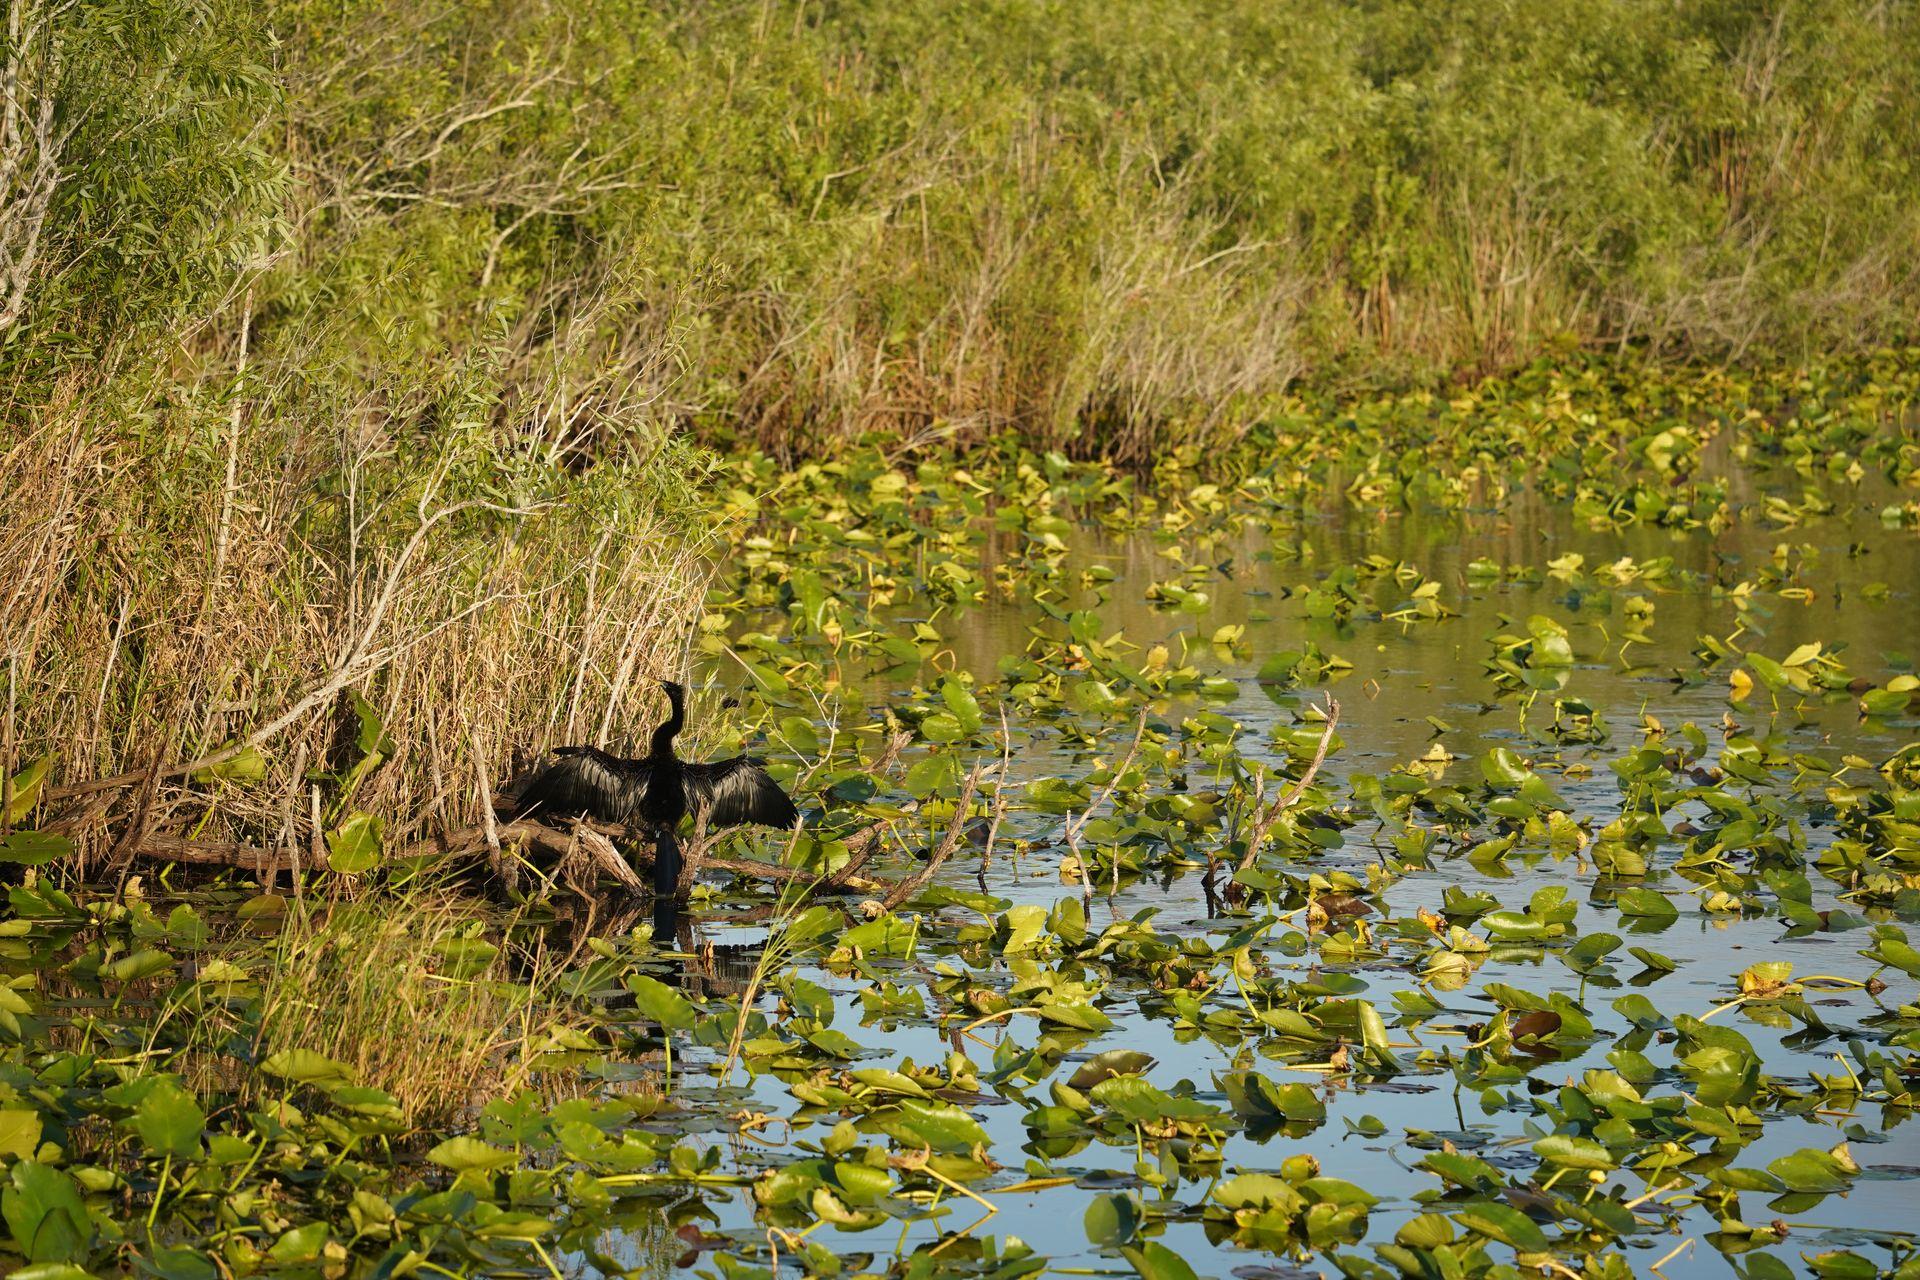 A pond full of lilypads with a black anhinga bread spreading it's wings on the edge of the water.